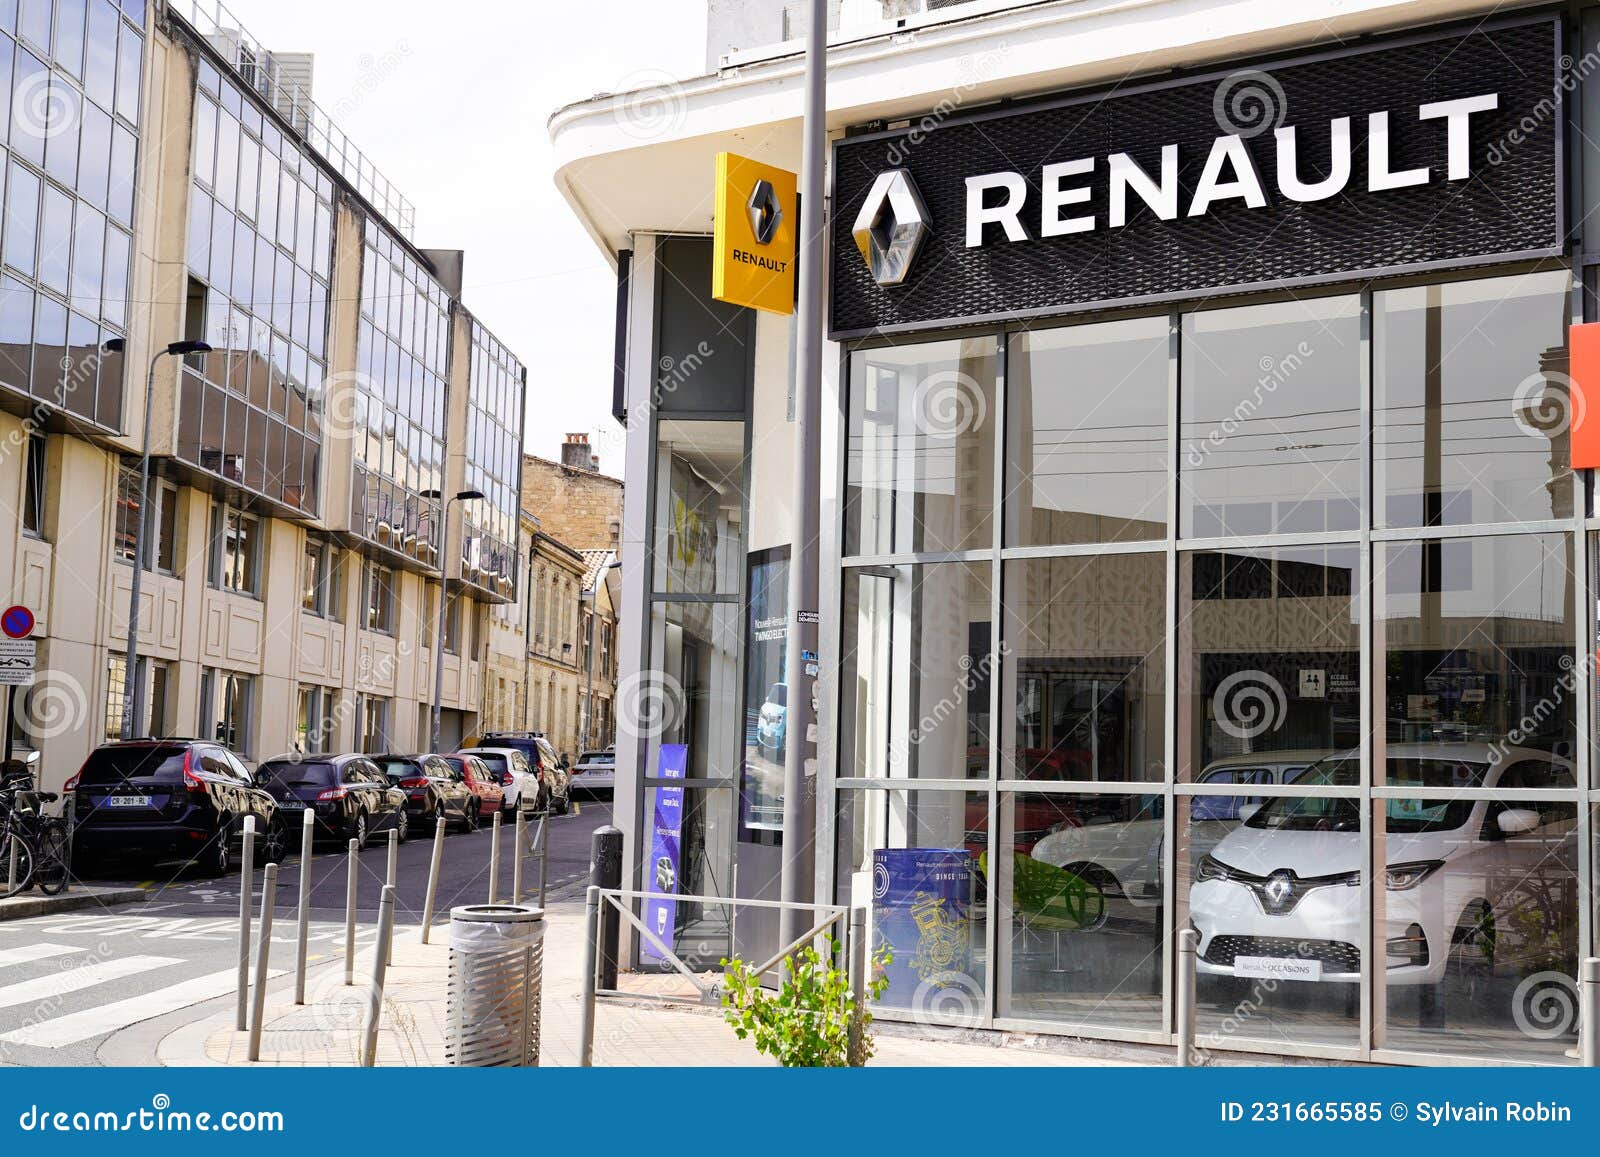 Renault Sign Text and Brand on Building Shop Dealership of French Store Editorial Image - Image of commercial, industry: